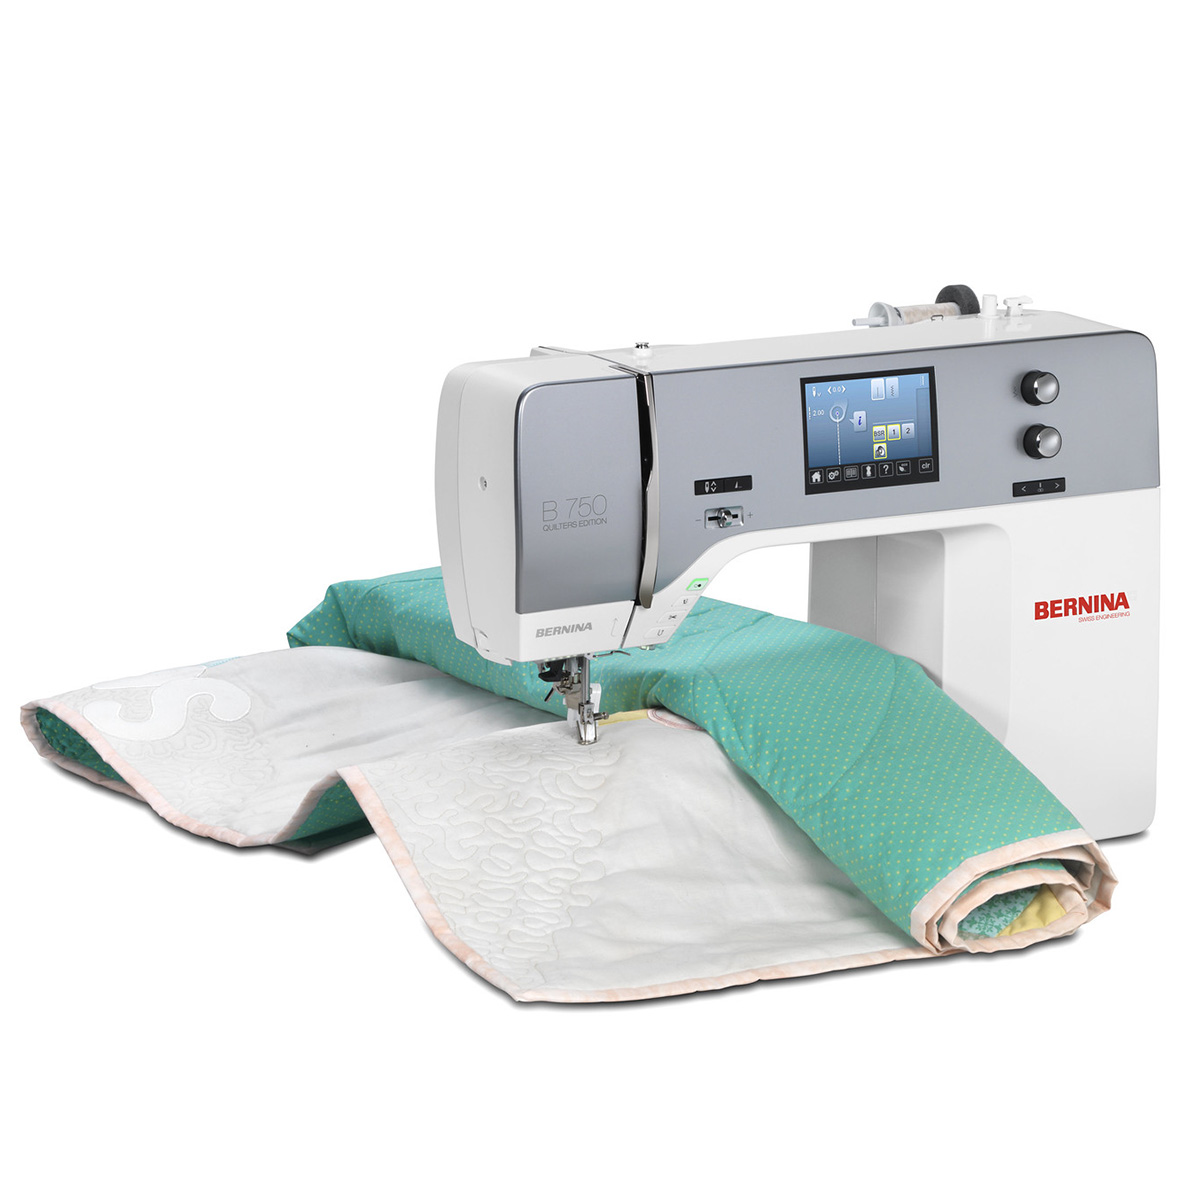 Bernina 750 OE with quilt